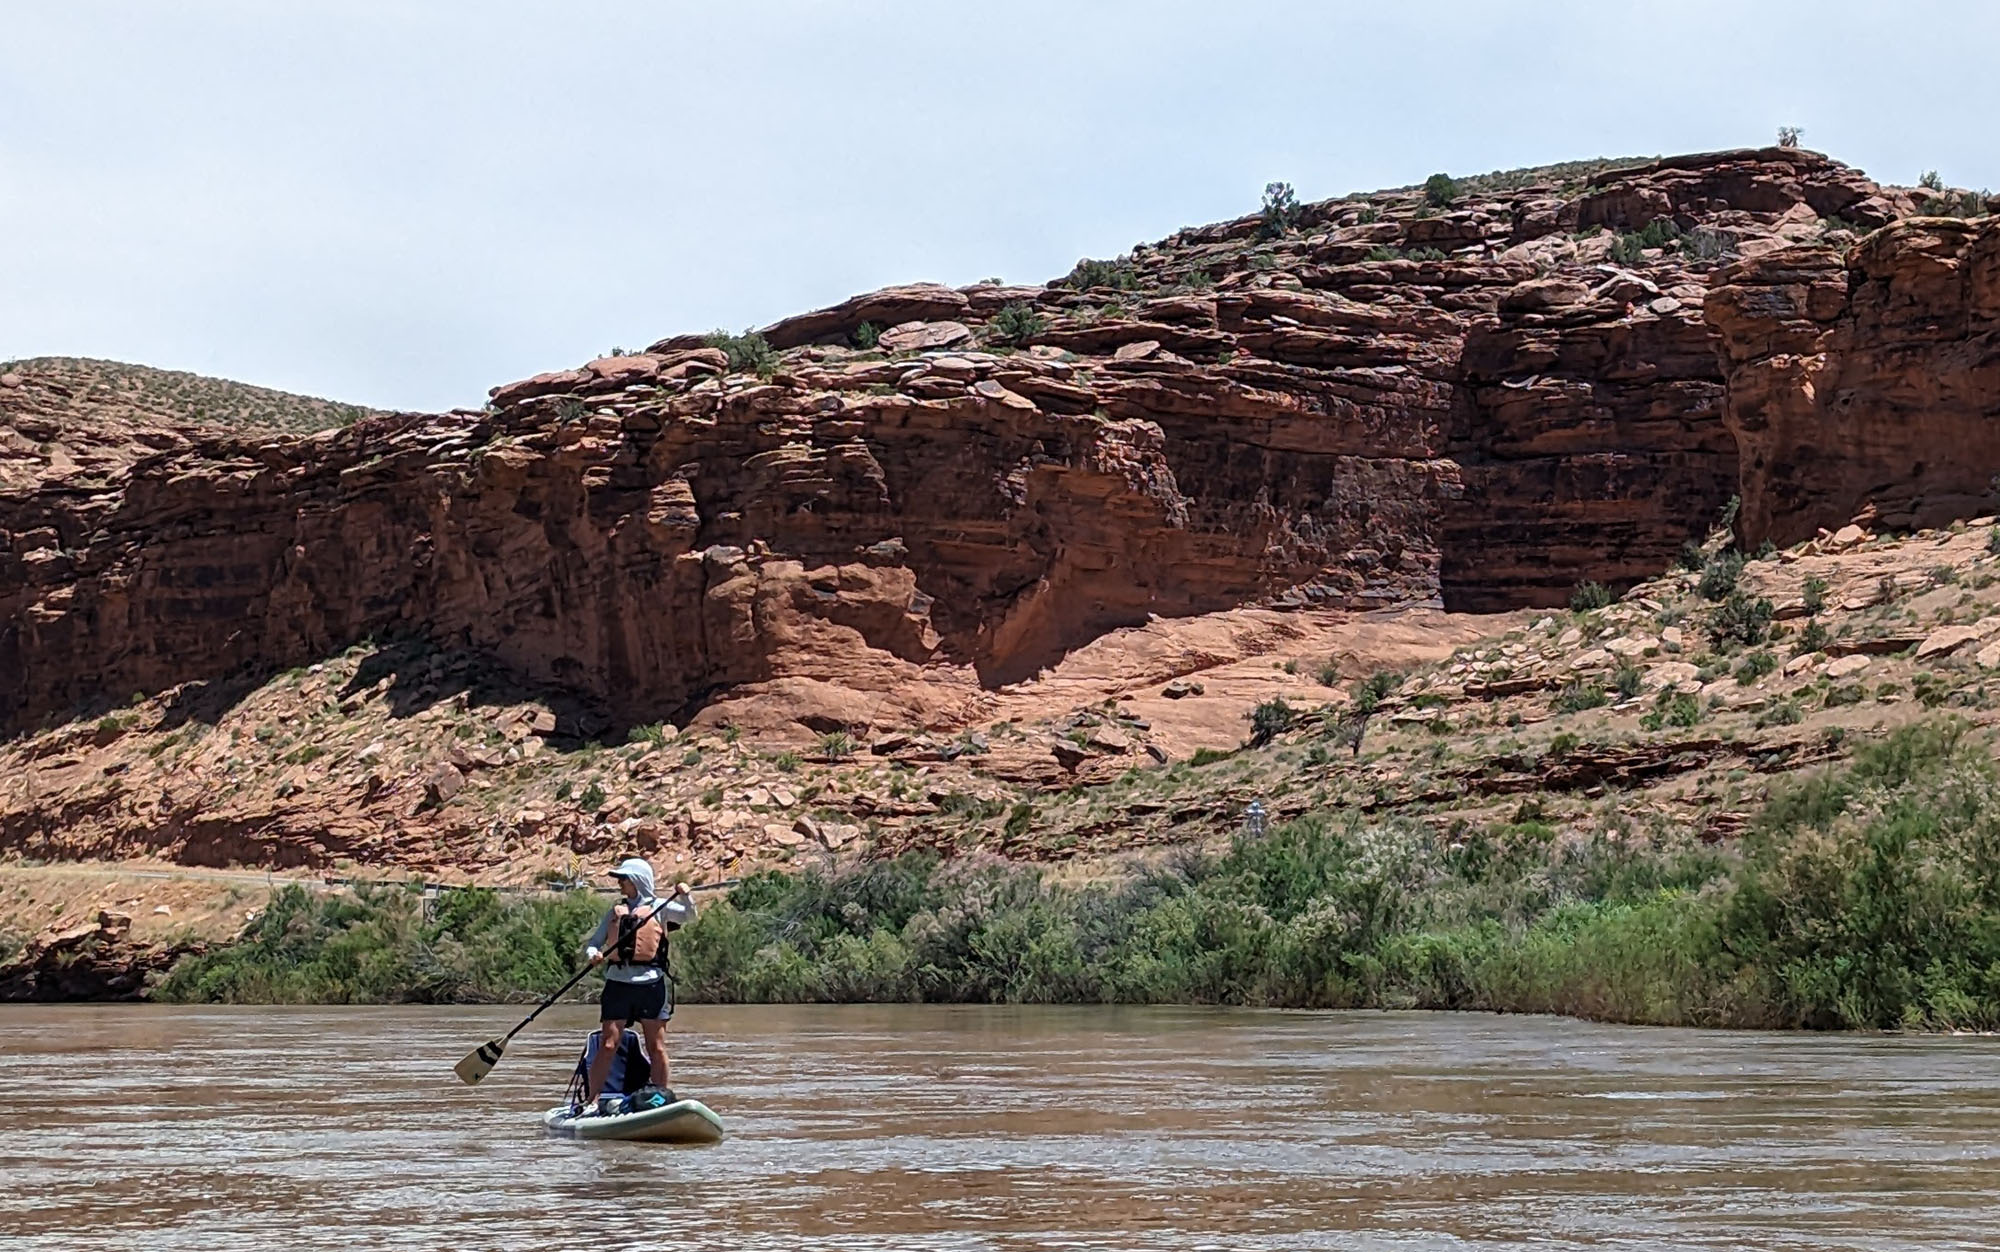 Even with the Isle Switch in kayak mode, it was easy to stand up for some gentle river paddling.